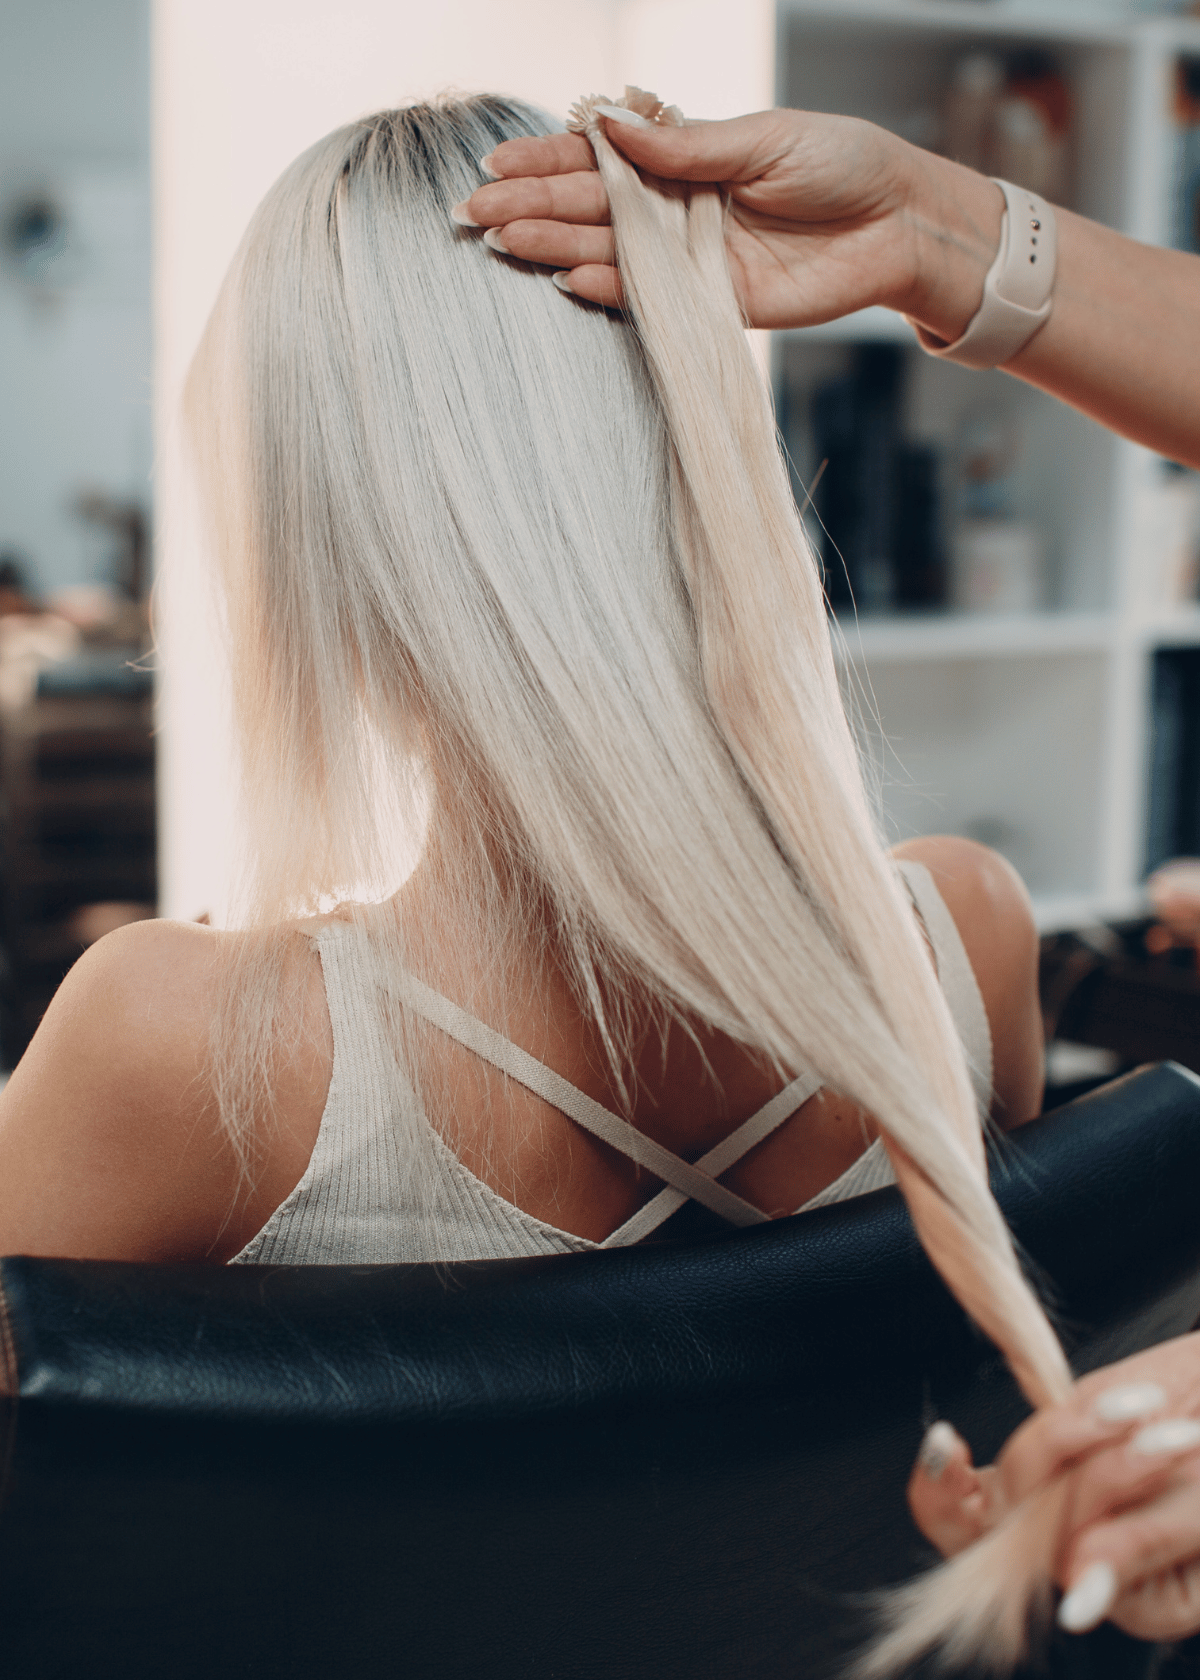 How to Properly Care for Hair Extensions